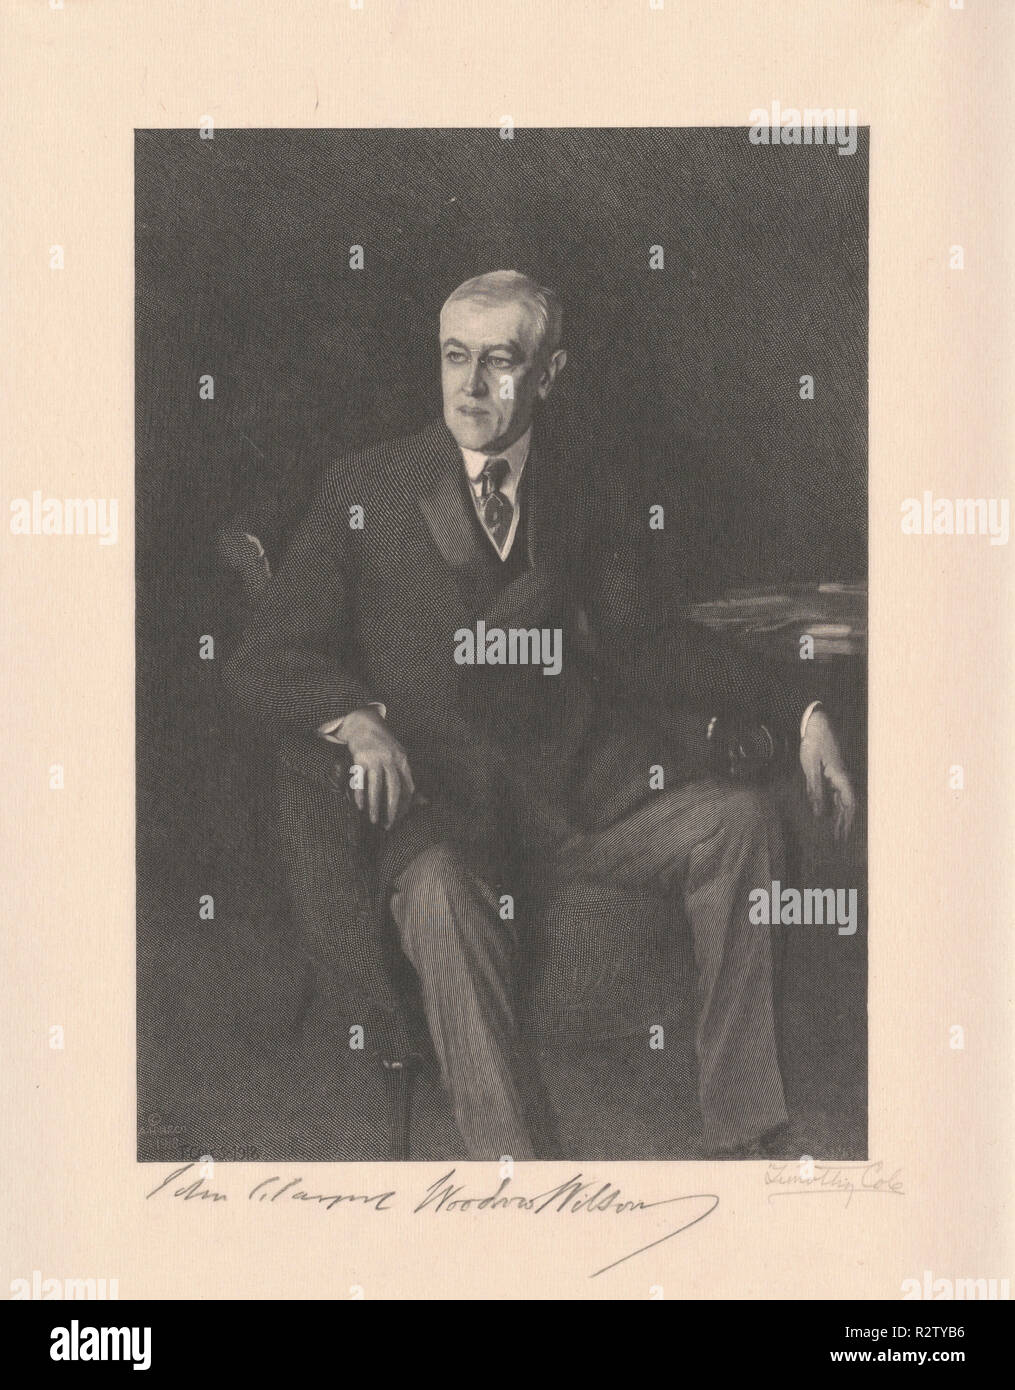 Woodrow Wilson. Dated: 1918. Dimensions: image: 25.08 × 17.78 cm (9 7/8 × 7 in.)  sheet: 34.93 × 31.12 cm (13 3/4 × 12 1/4 in.). Medium: wood engraving in black on wove paper. Museum: National Gallery of Art, Washington DC. Author: Timothy Cole, after John Singer Sargent. Timothy Cole after John Singer Sargent. Stock Photo